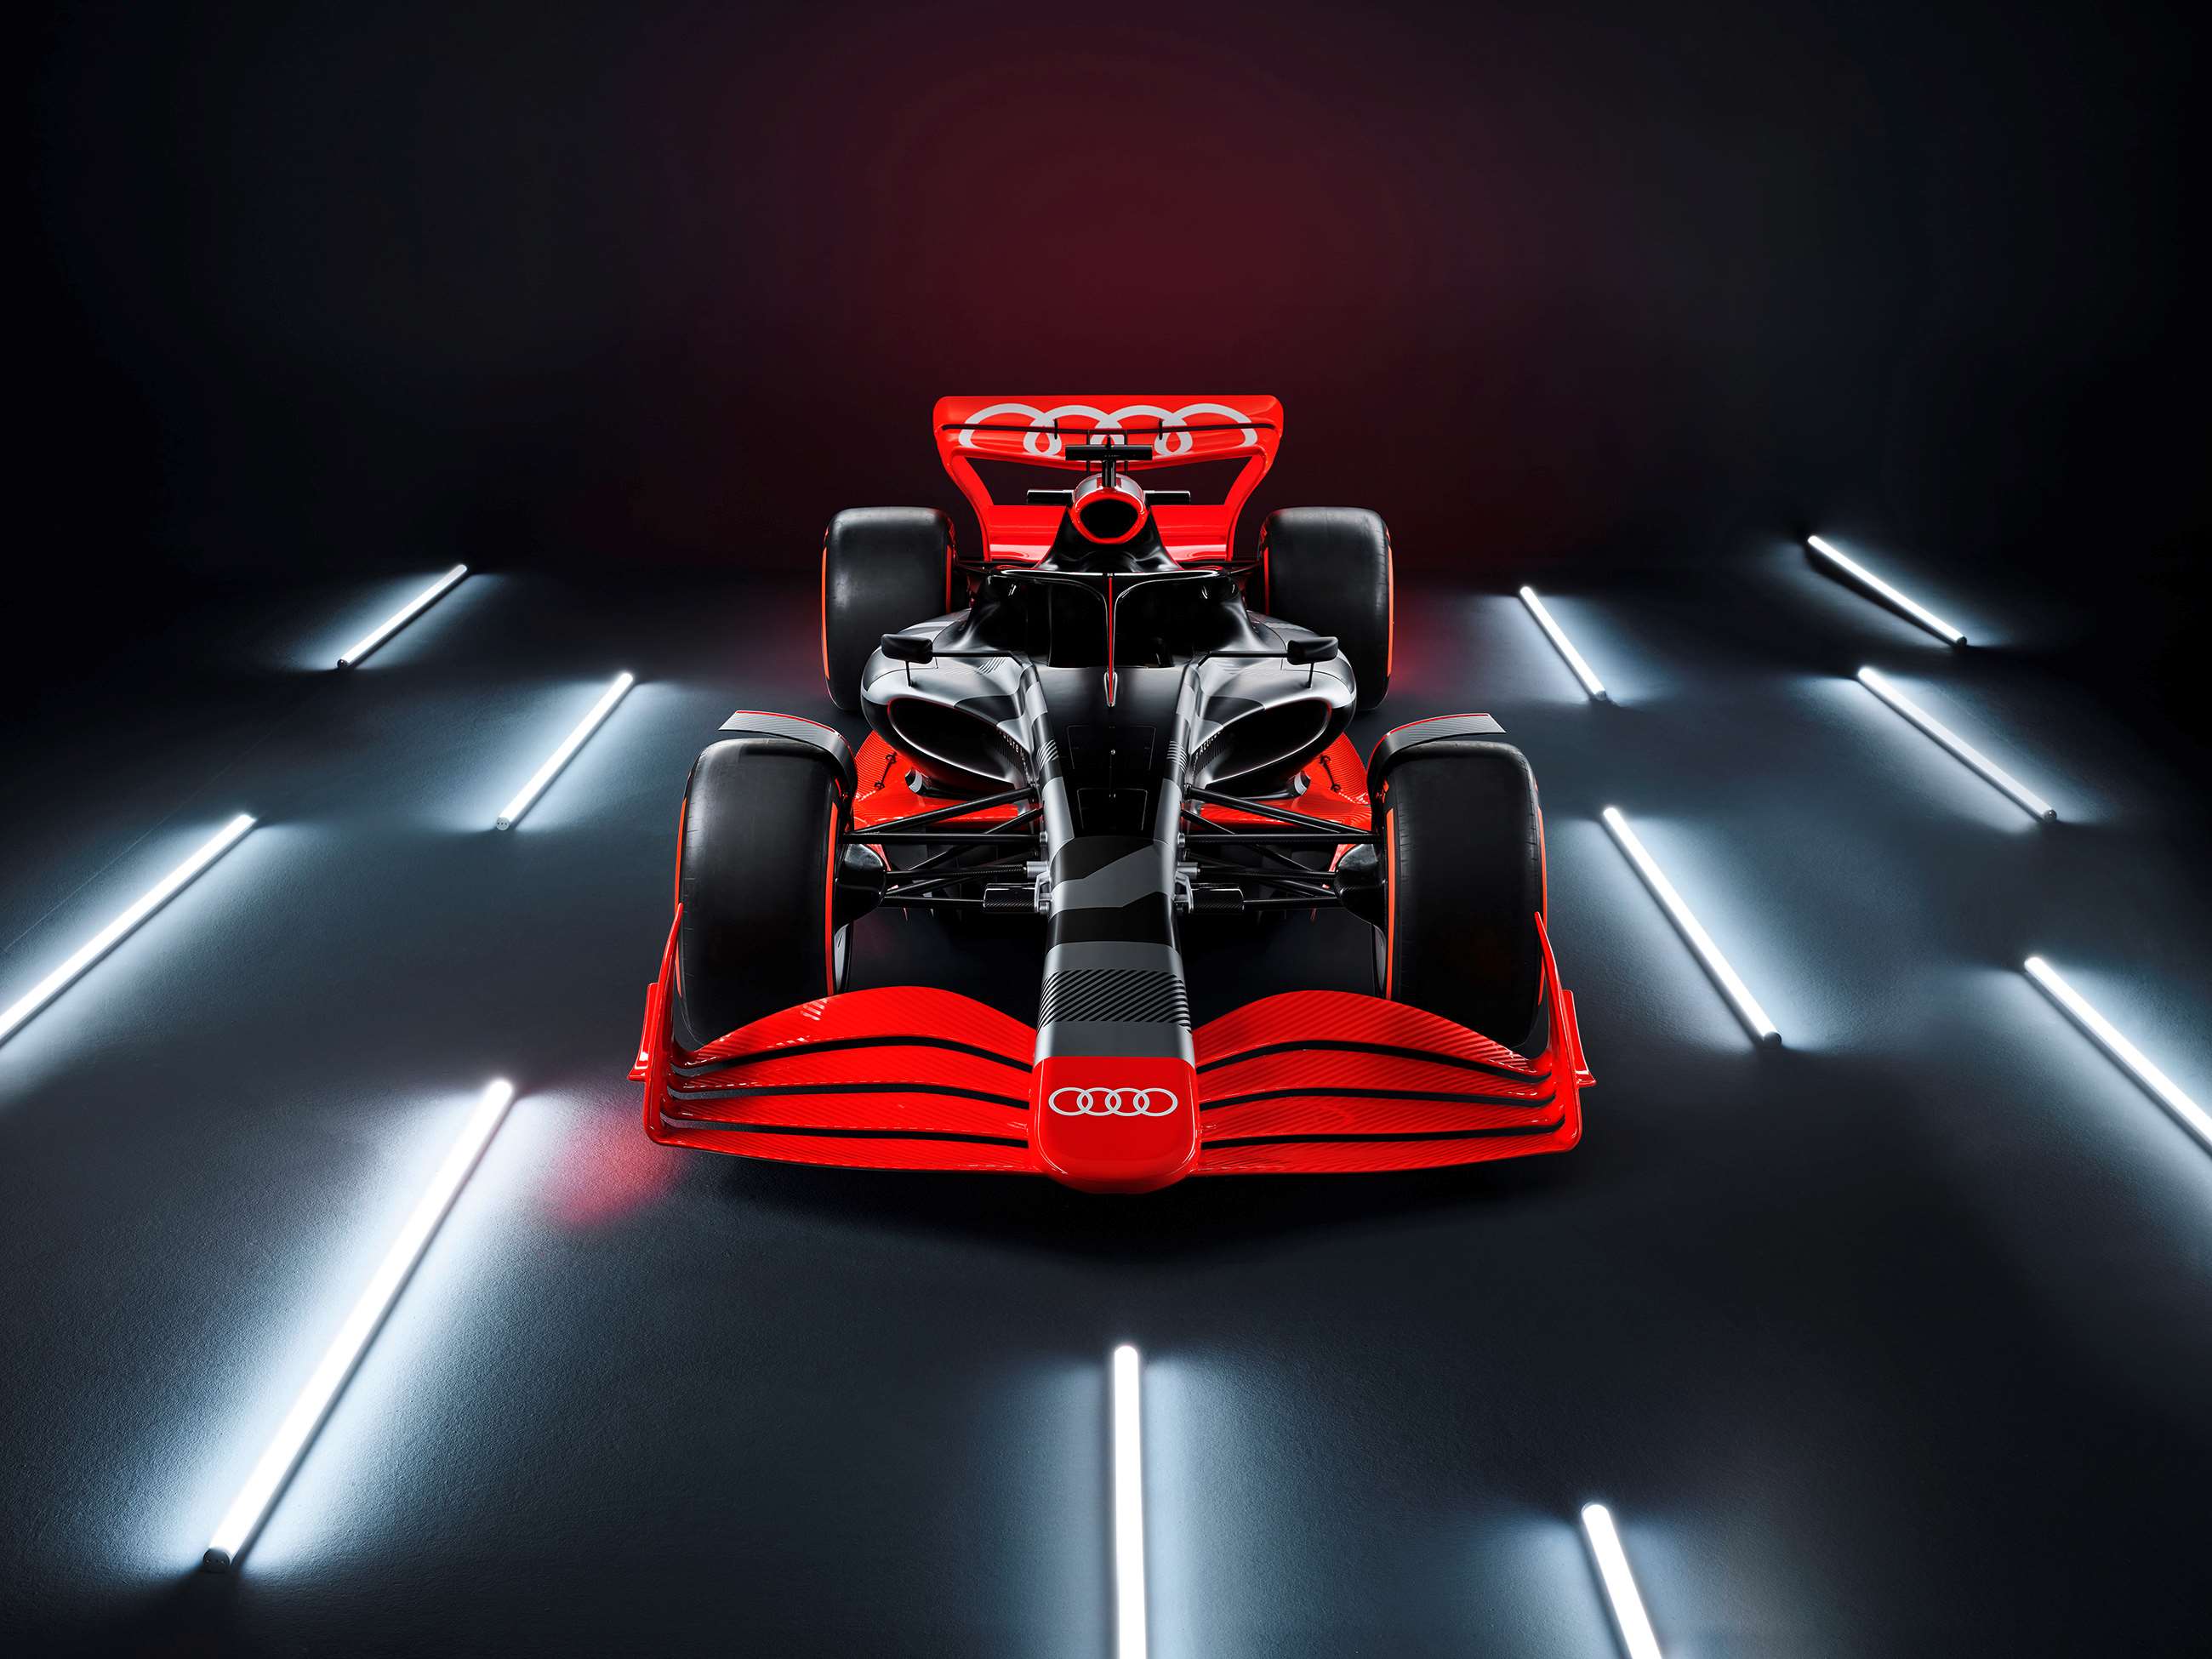 Audi to enter F1 with Sauber GRR